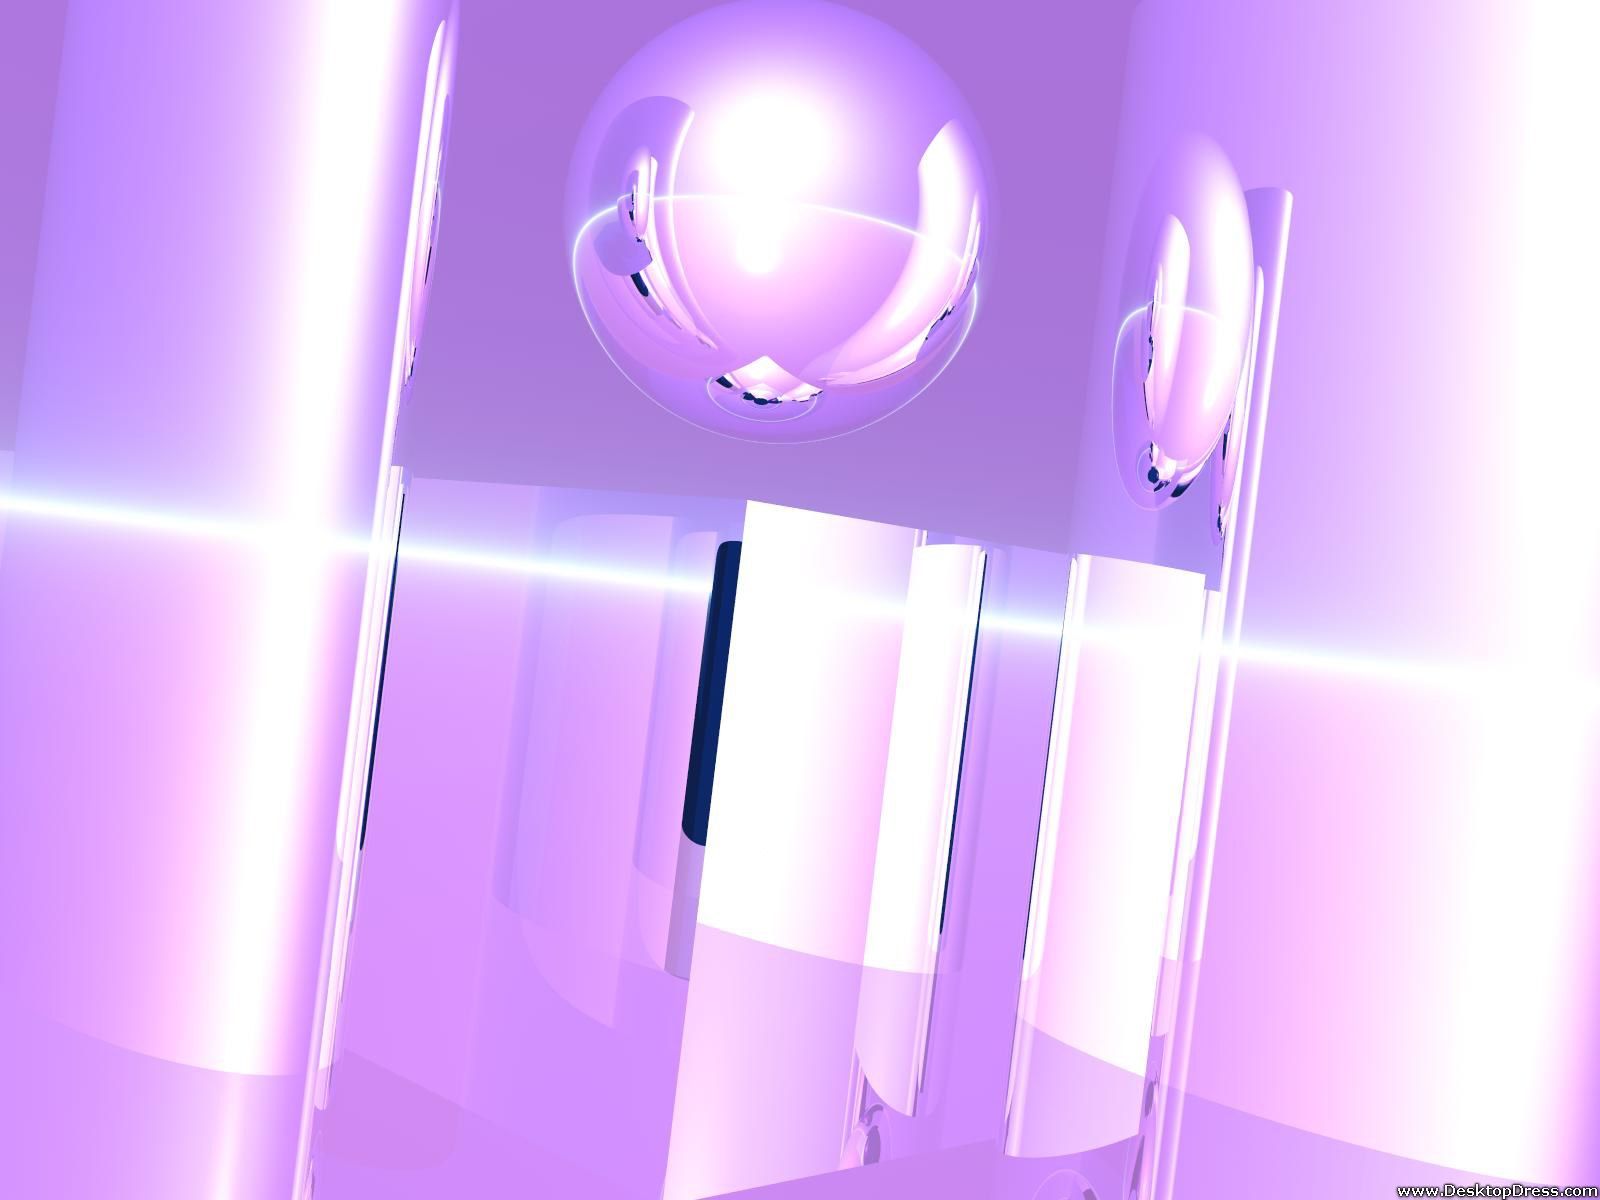 3D fractal of a room with purple walls and a purple sphere - 3D